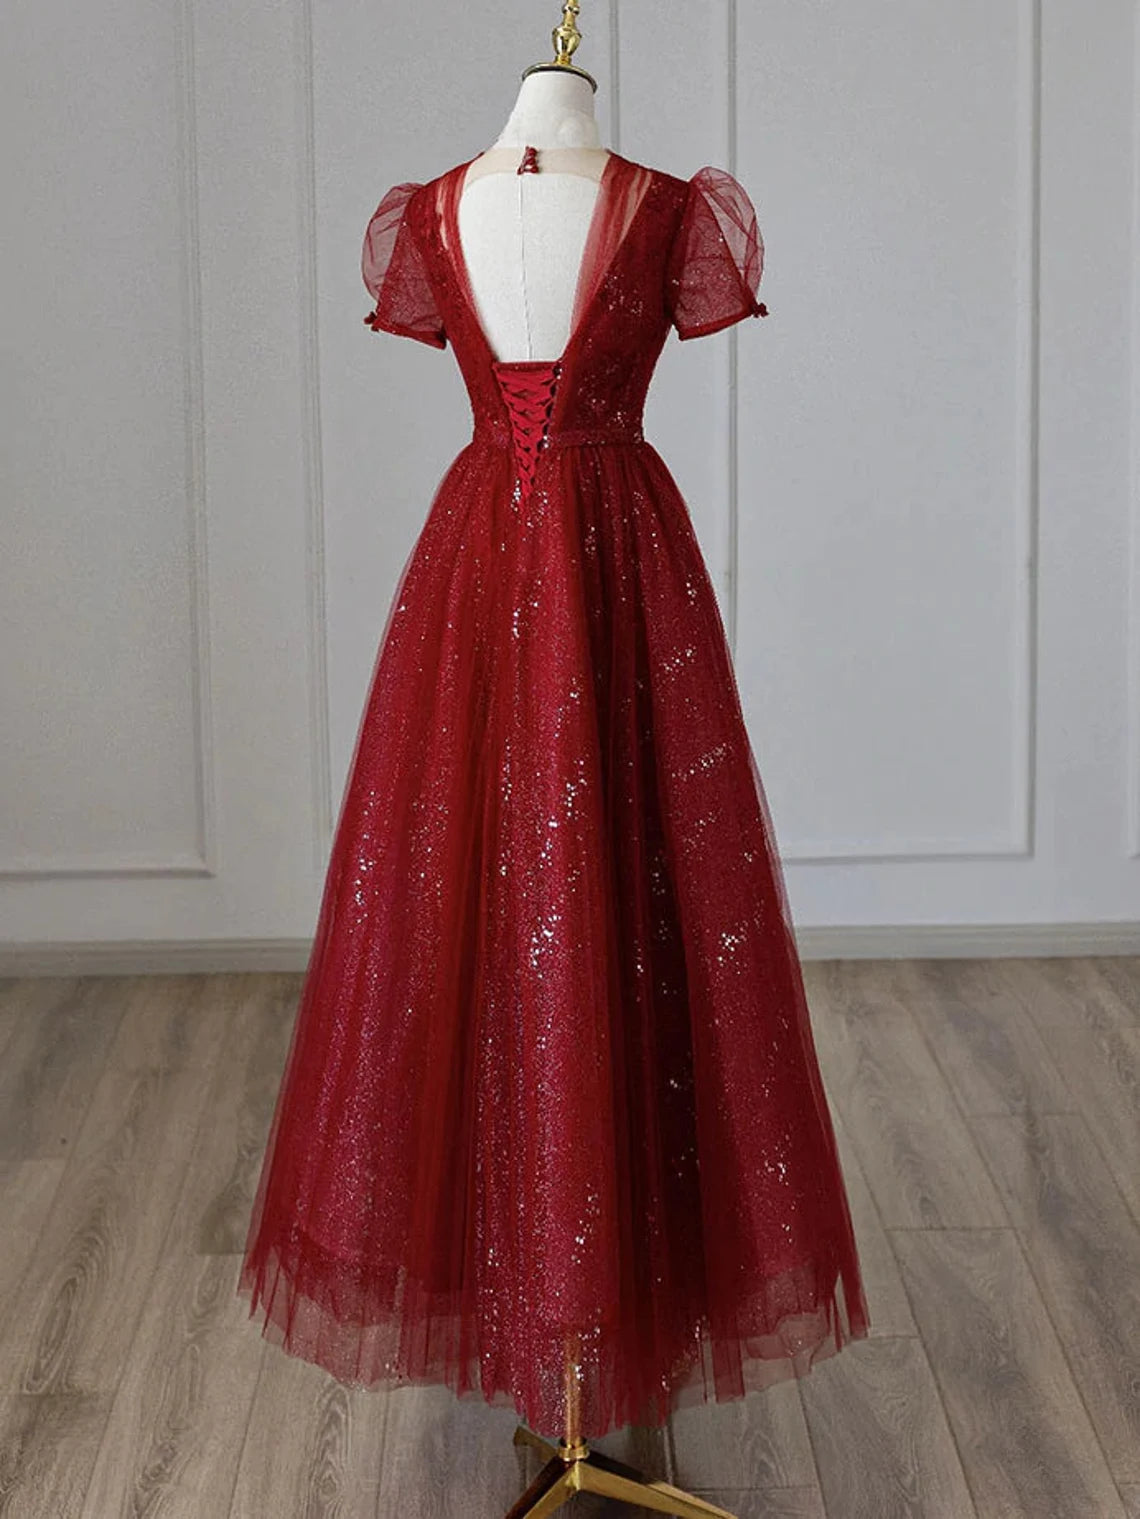 Formal Dresses Long Sleeve, Wine Red Tulle Cap Sleeves Bridesmaid Dress, Wine Red Long Prom Dress